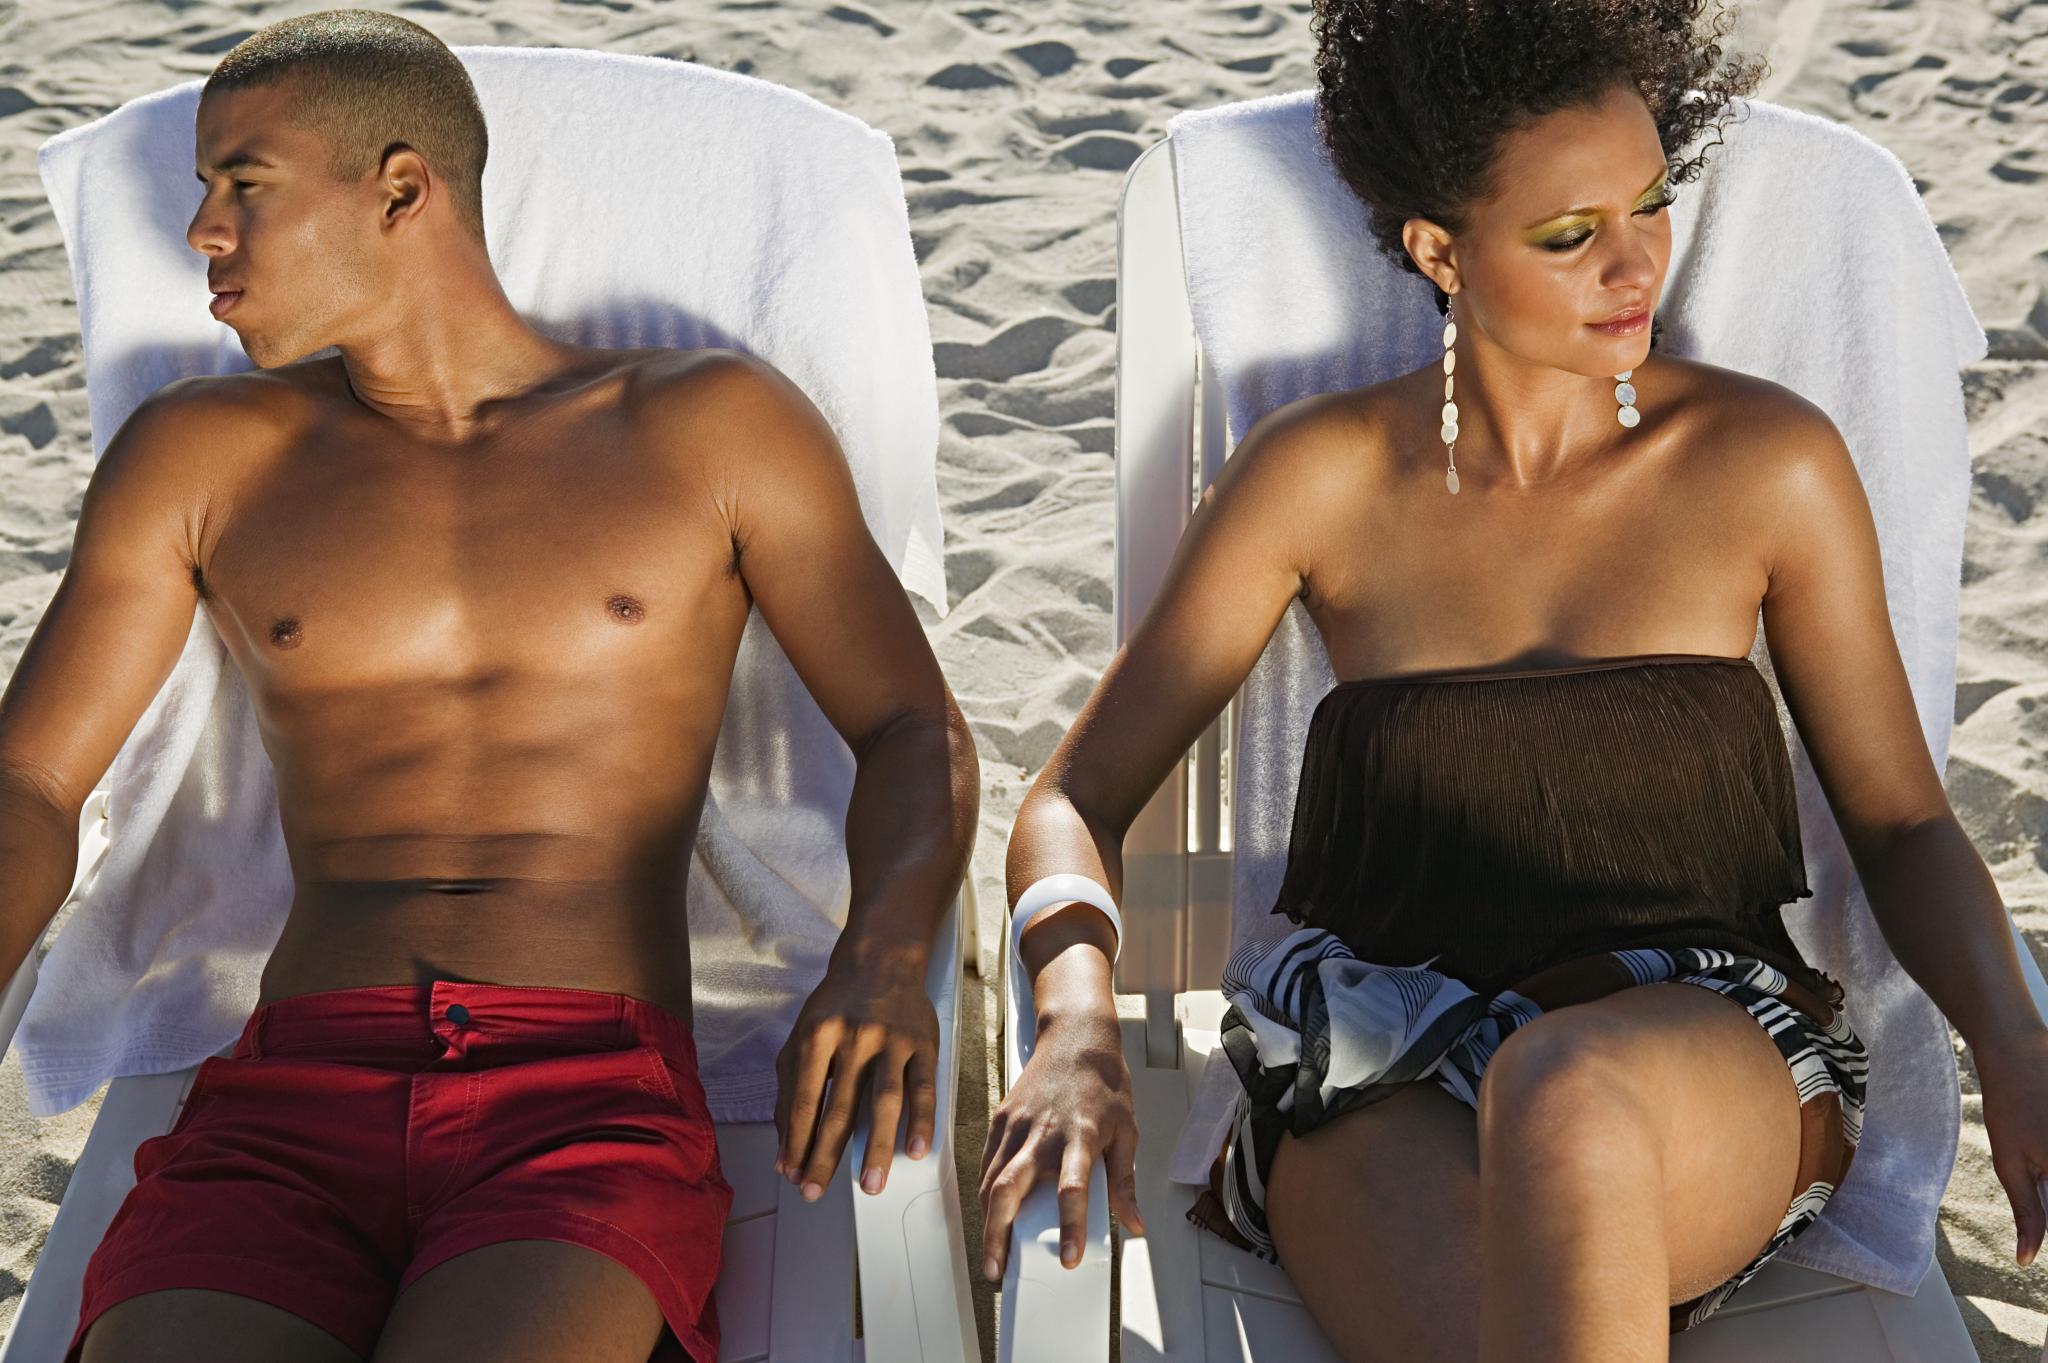 11 Ways to Have Your Sexiest Summer Ever